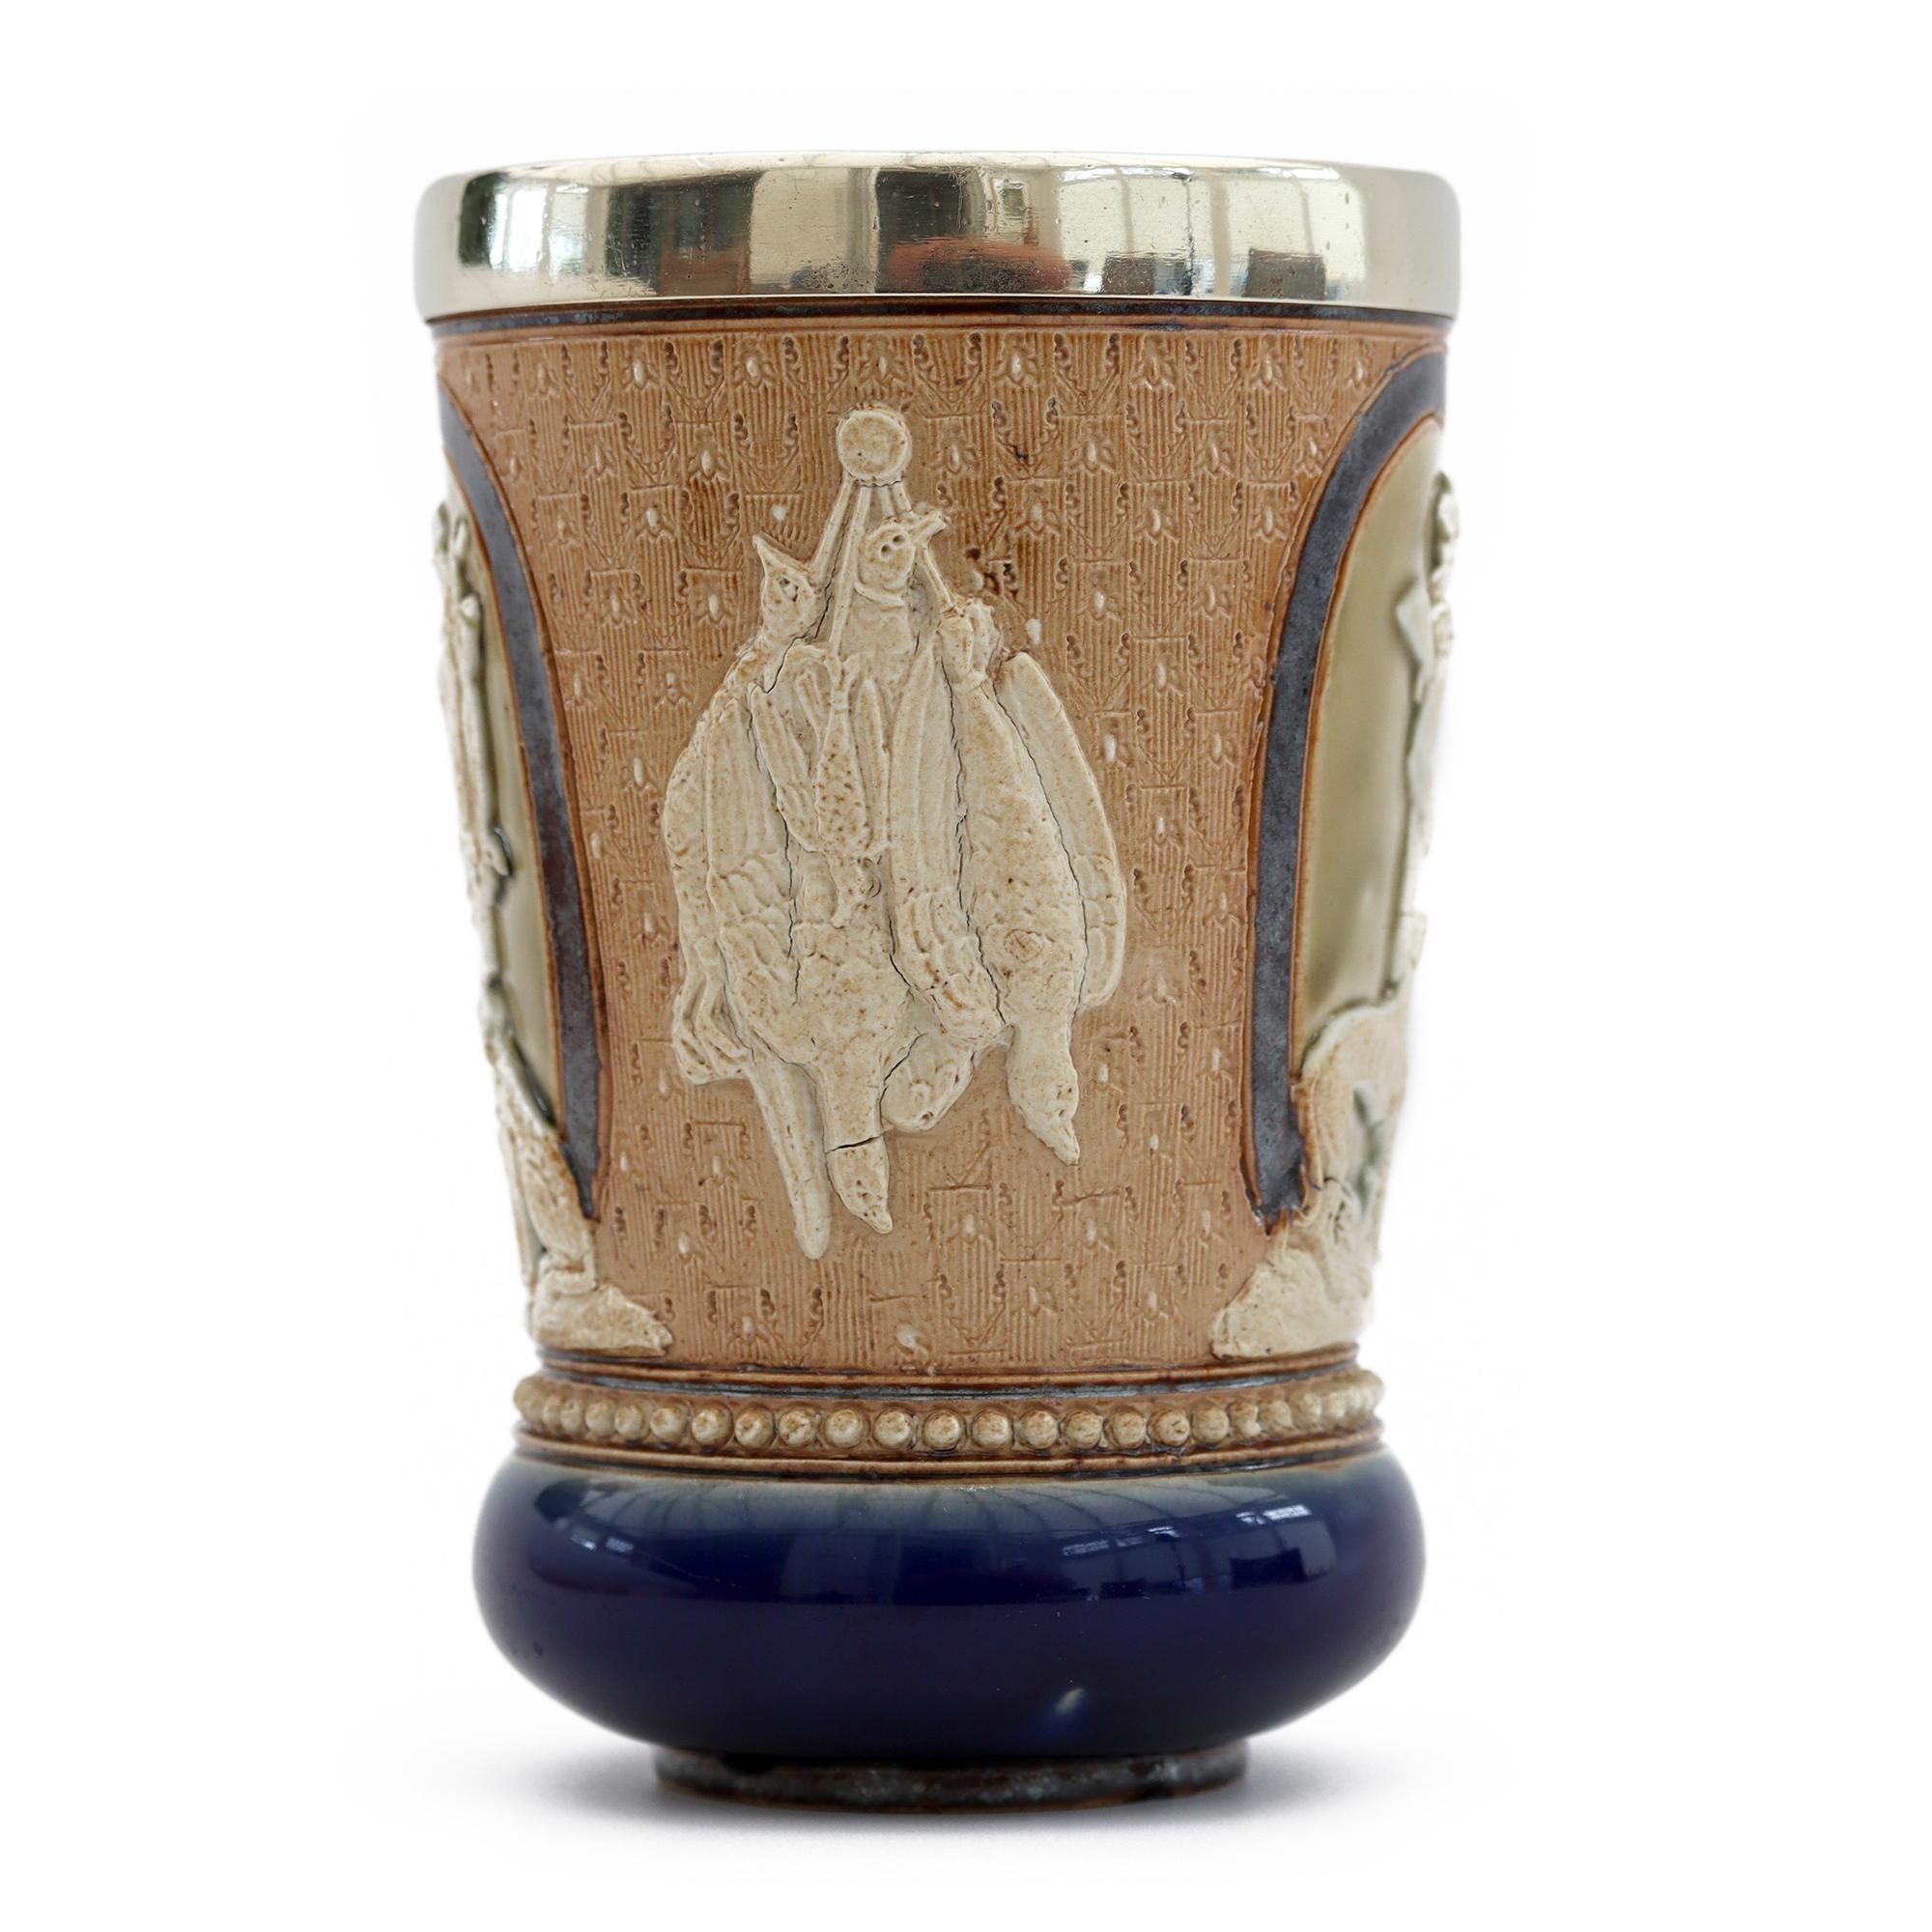 A very rare Doulton Lambeth art pottery Huntsman beaker decorated with figures of huntsmen by renowned artist Minnie Thompson and assisted by Matilda Martyn and Mary Lilly. The stoneware beaker dated 1882 is decorated with three panels each moulded